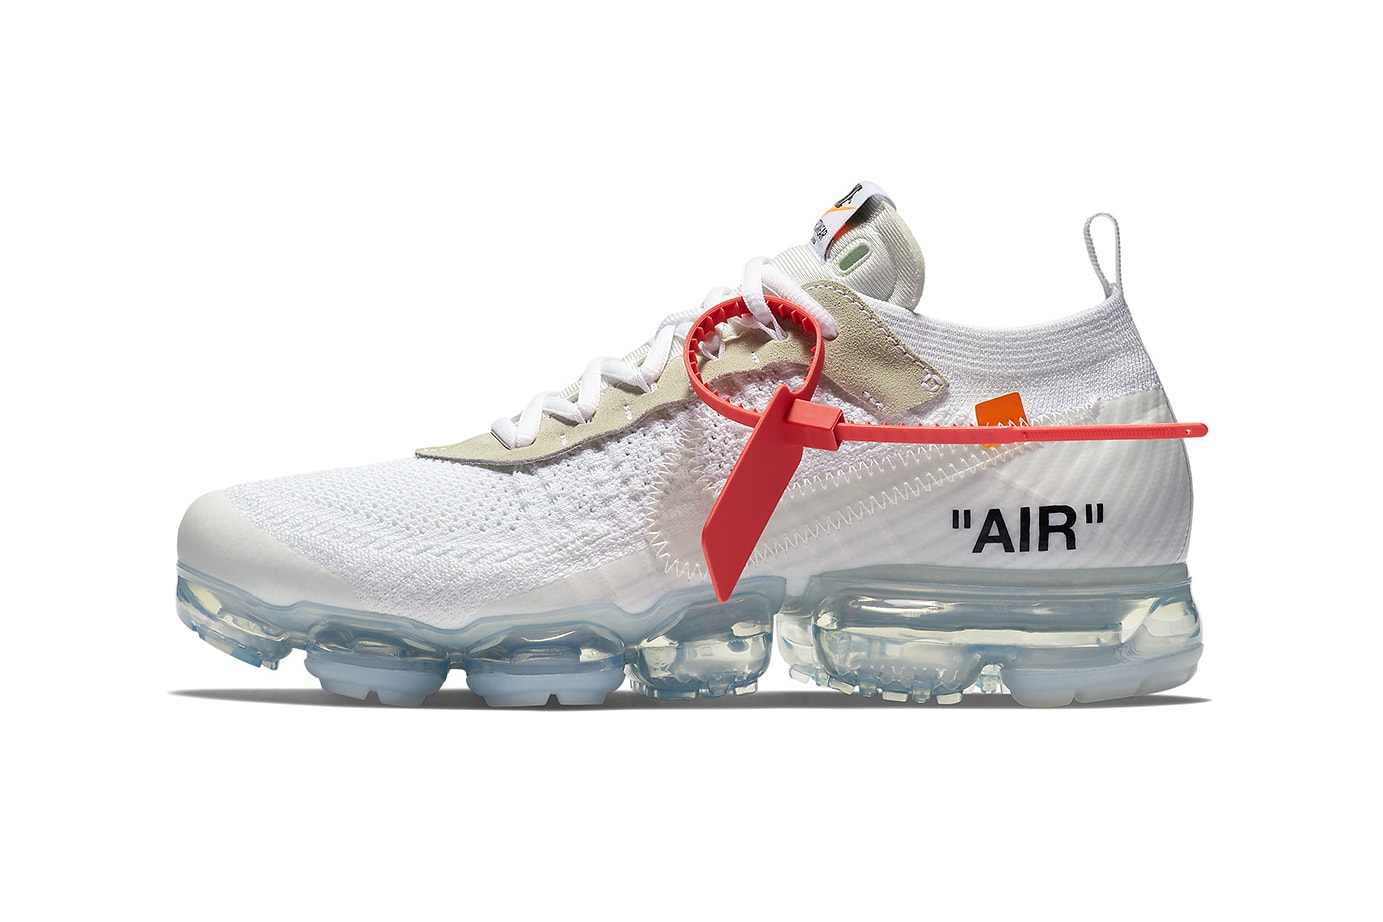 Virgil Abloh x Nike Air Vapormax White Colorway Store List off-white hypebeast footwear sneakers trainers nike shoes style milan fashion sports athletic shoes Vapormax Virgil Pyrex Nike